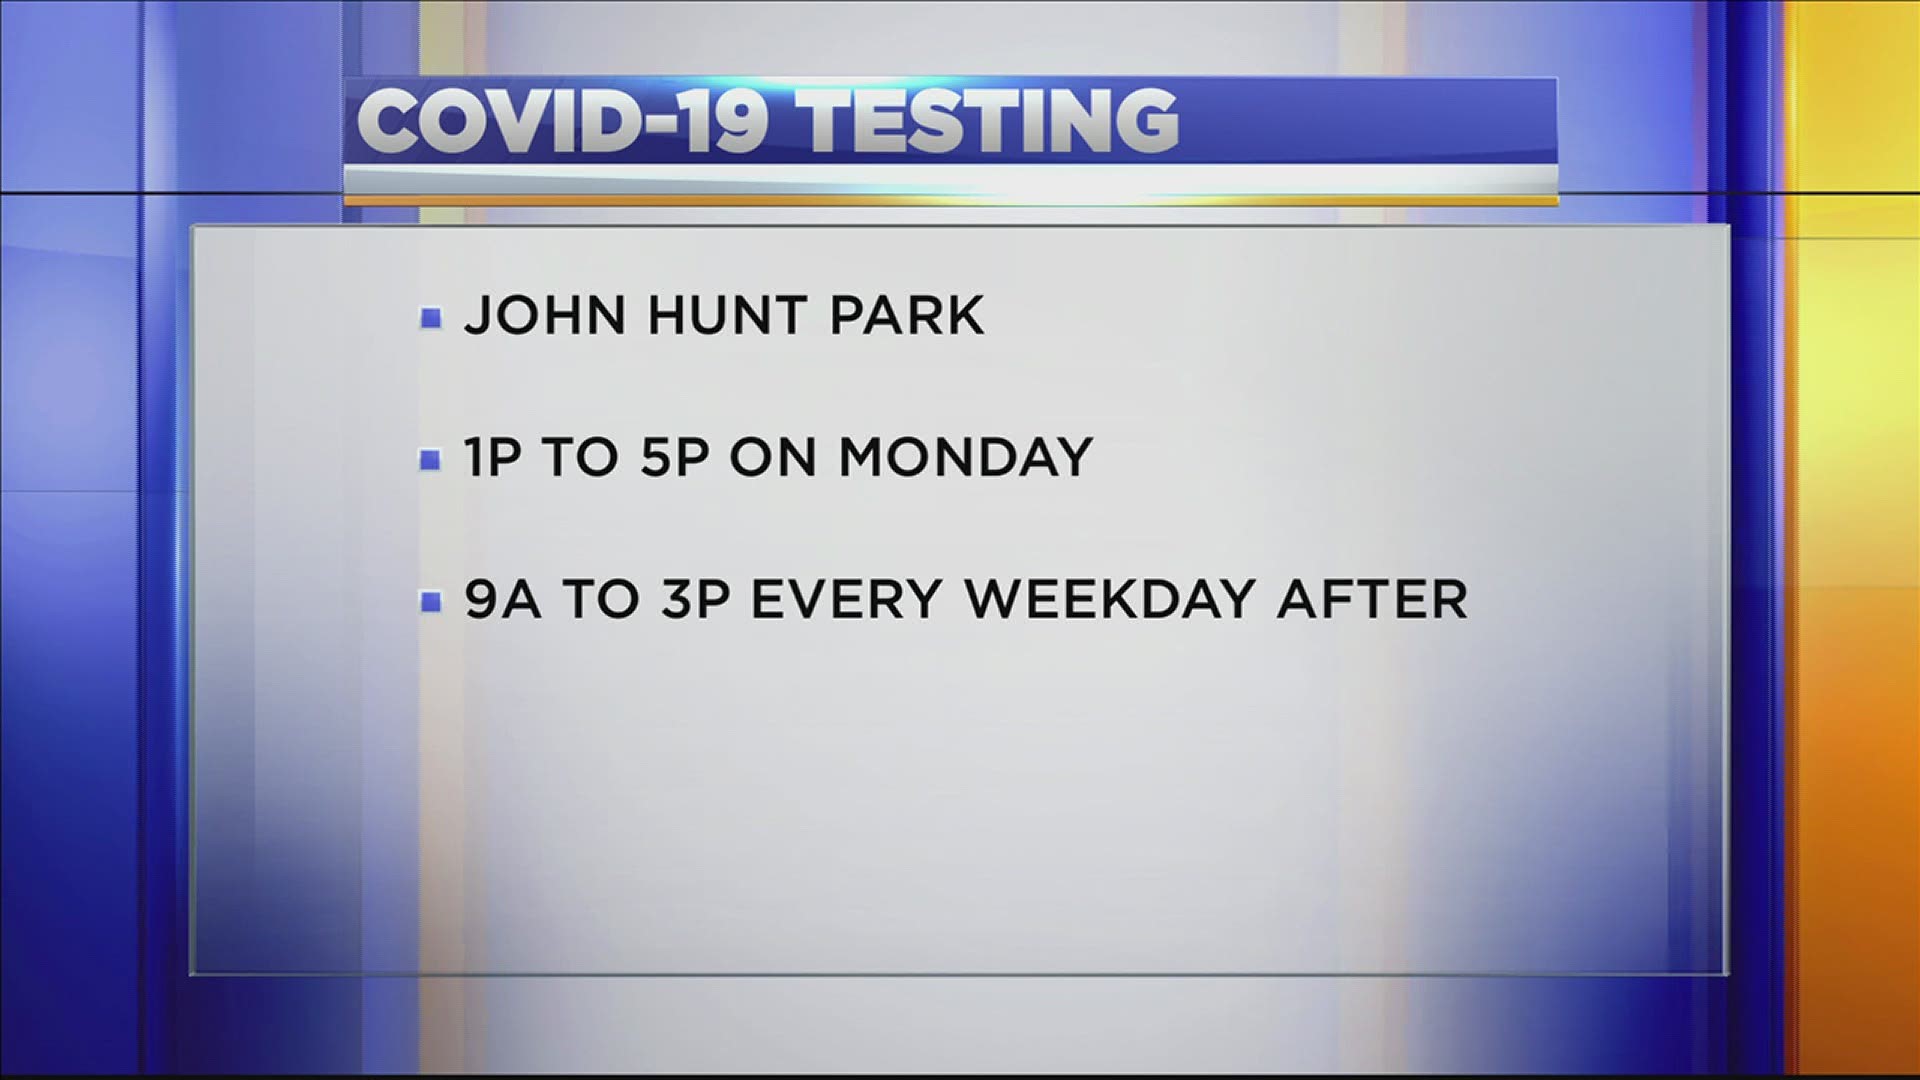 Drive-through COVID-19 testing opens
Monday, July 6, at 1 p.m.